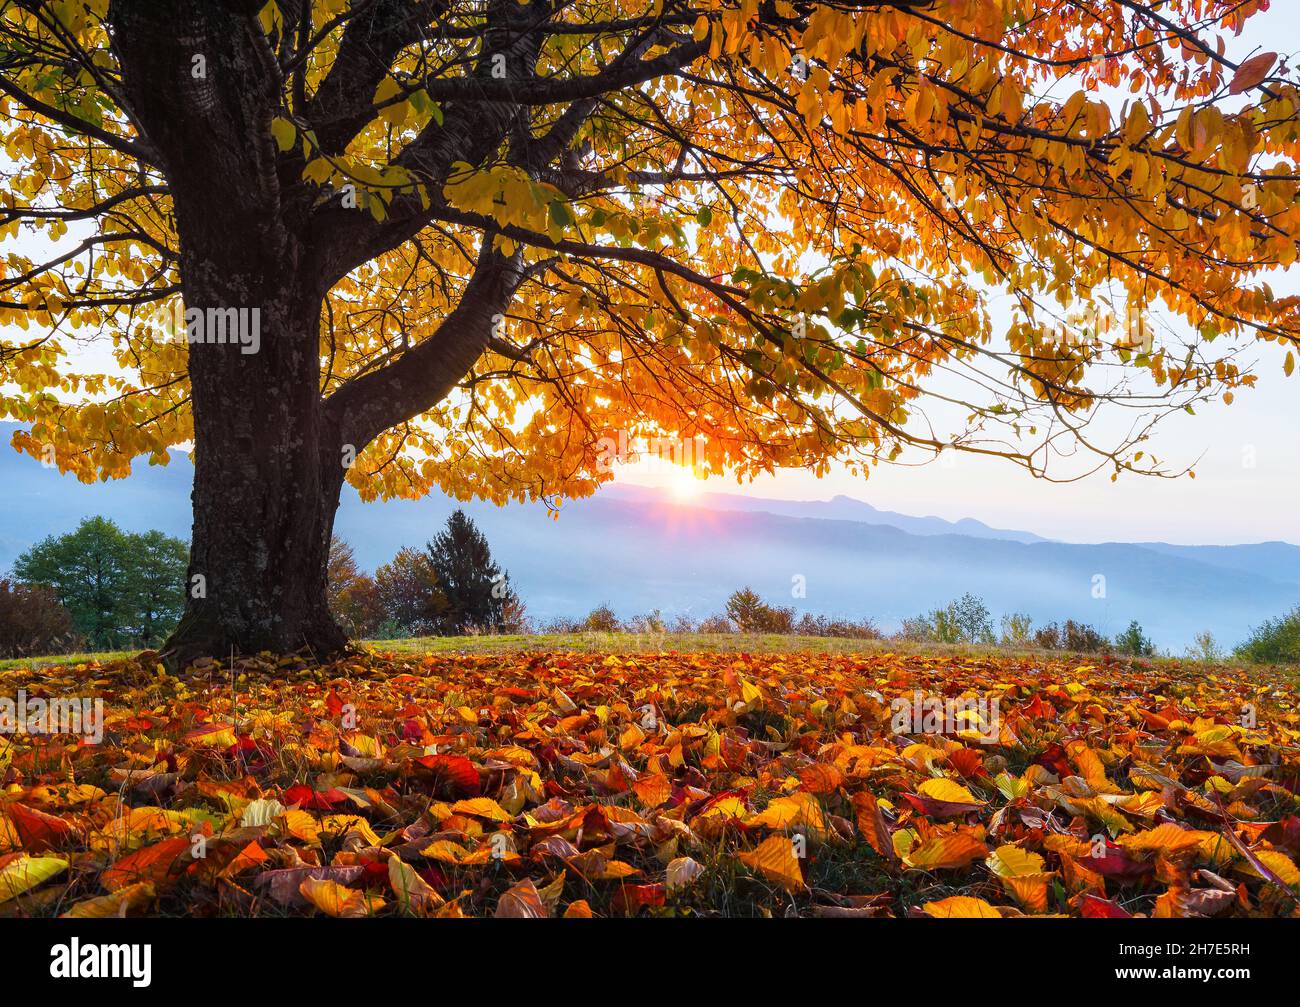 Sunny autumn. There is a lonely lush tree on the lawn covered with orange leaves through which the sun rays are shining. Rural scenery with mountains, Stock Photo